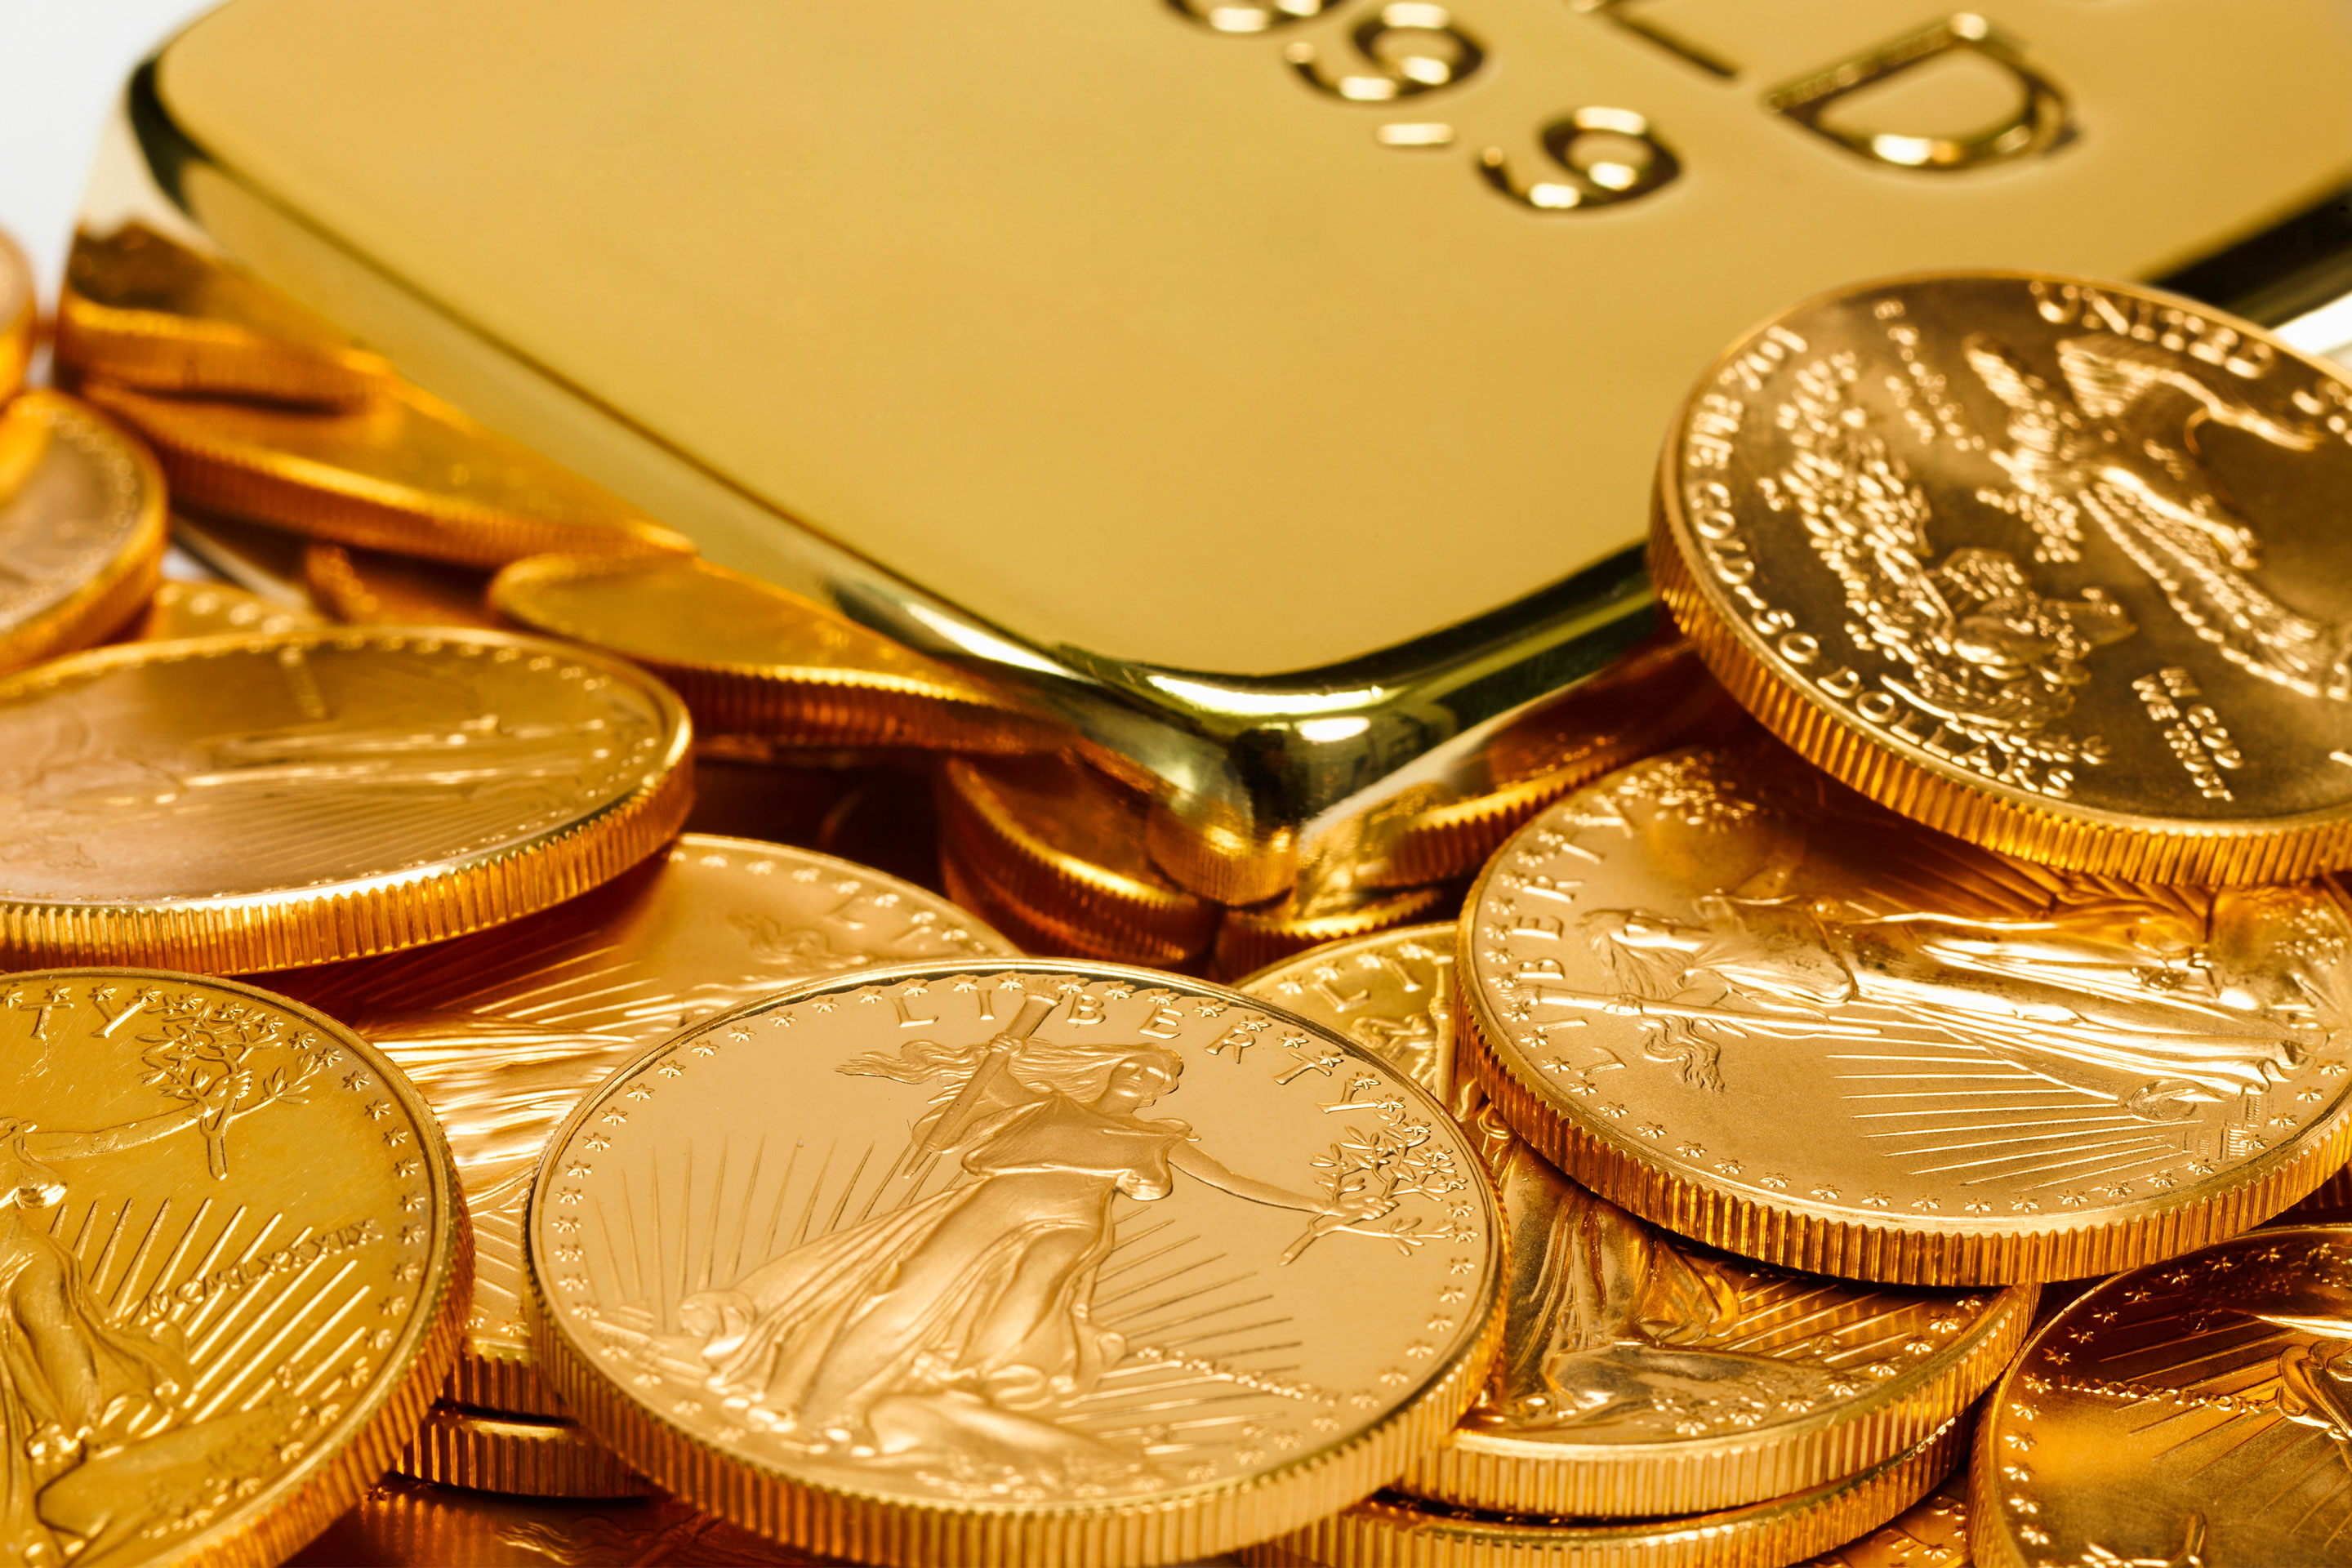 What Drives the Price of Gold?